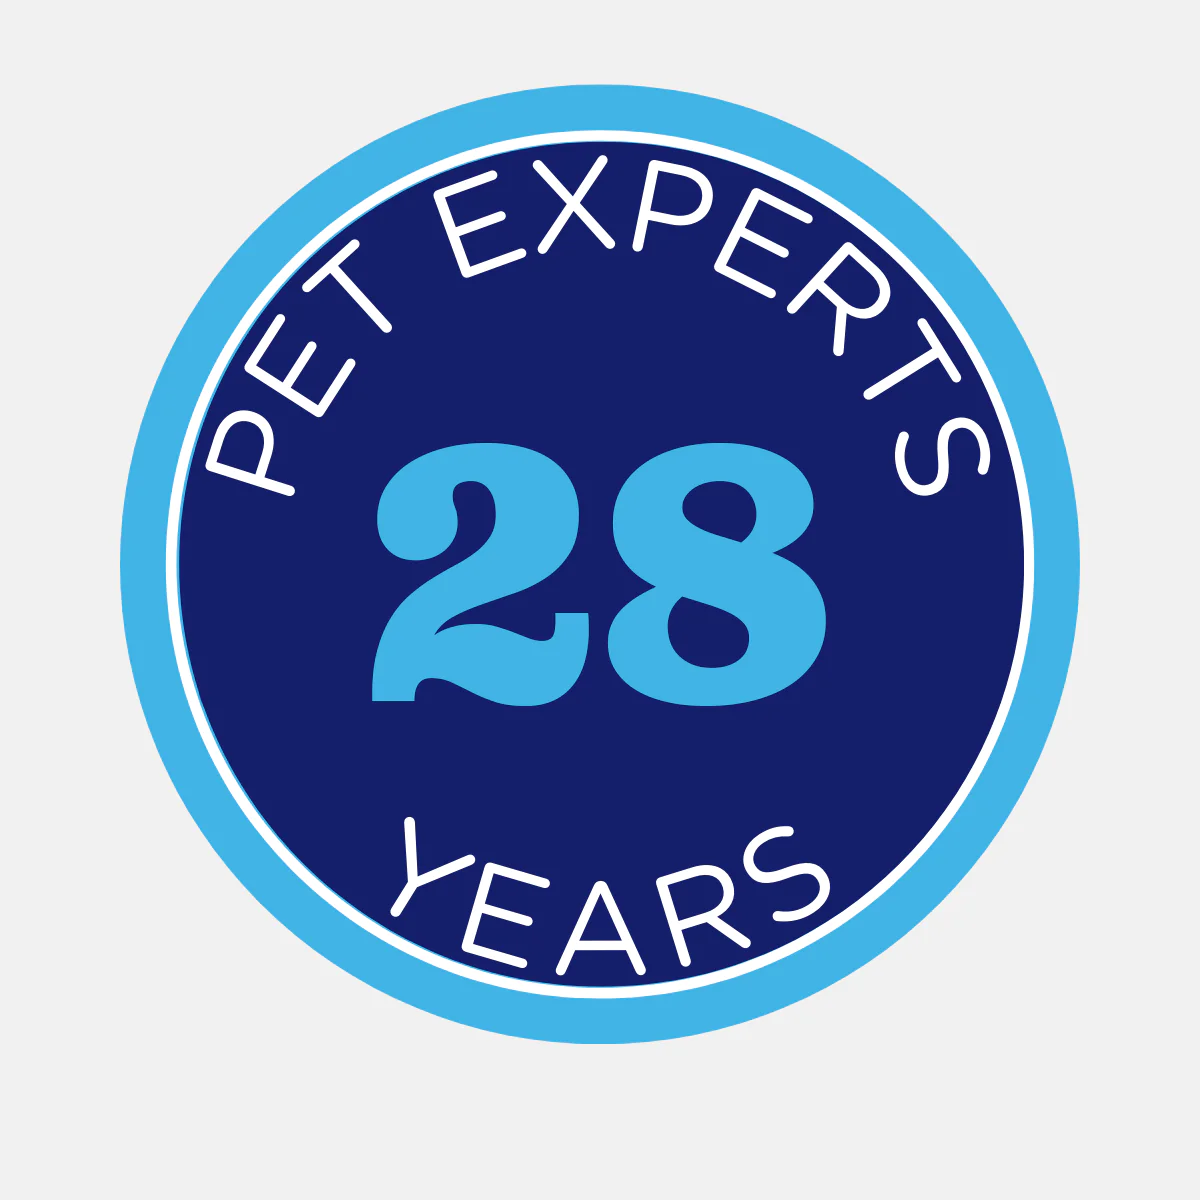 Greenhaven Pet Experts 27 Years.